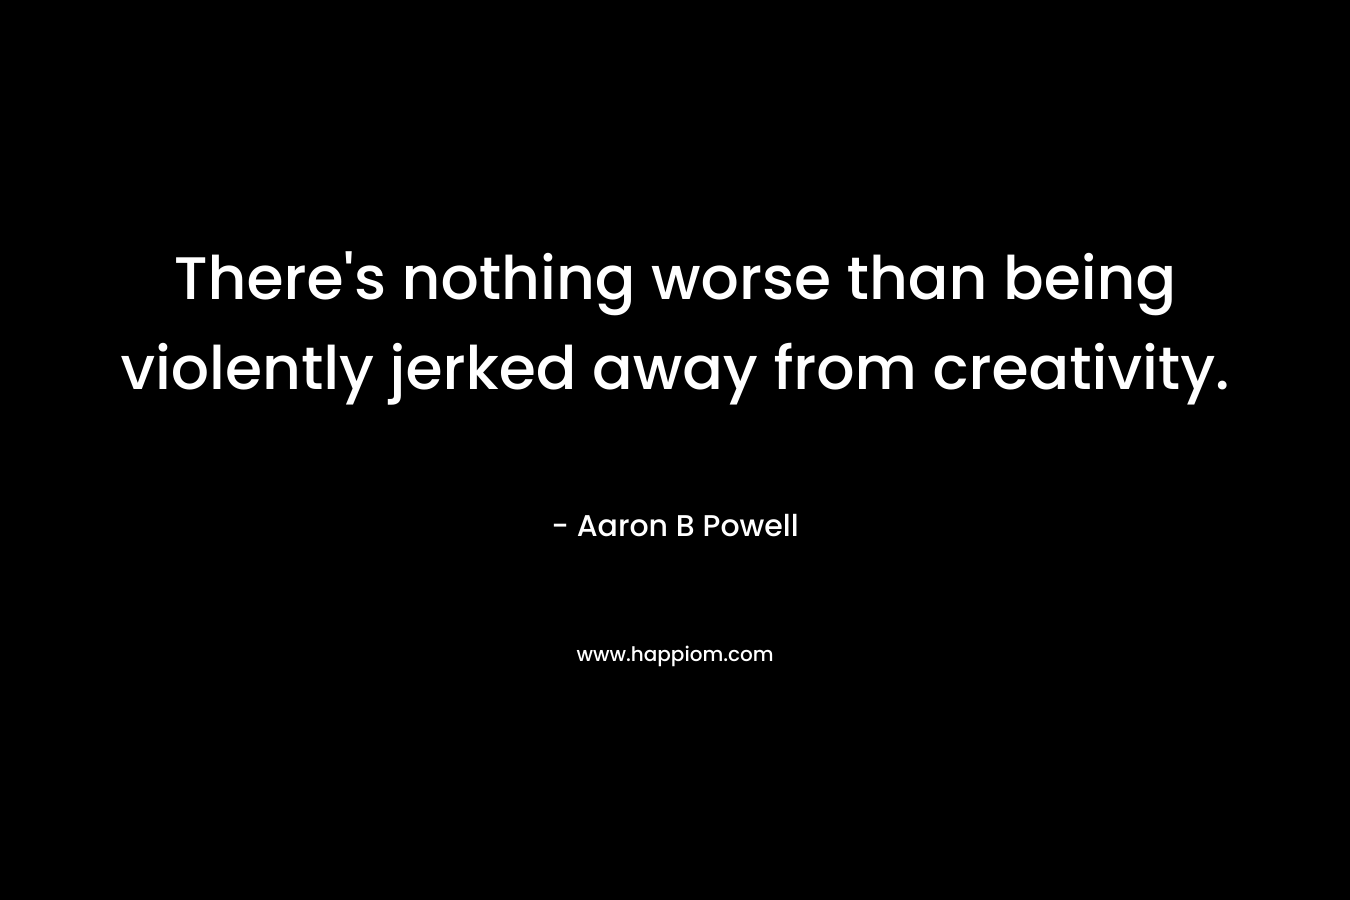 There's nothing worse than being violently jerked away from creativity.